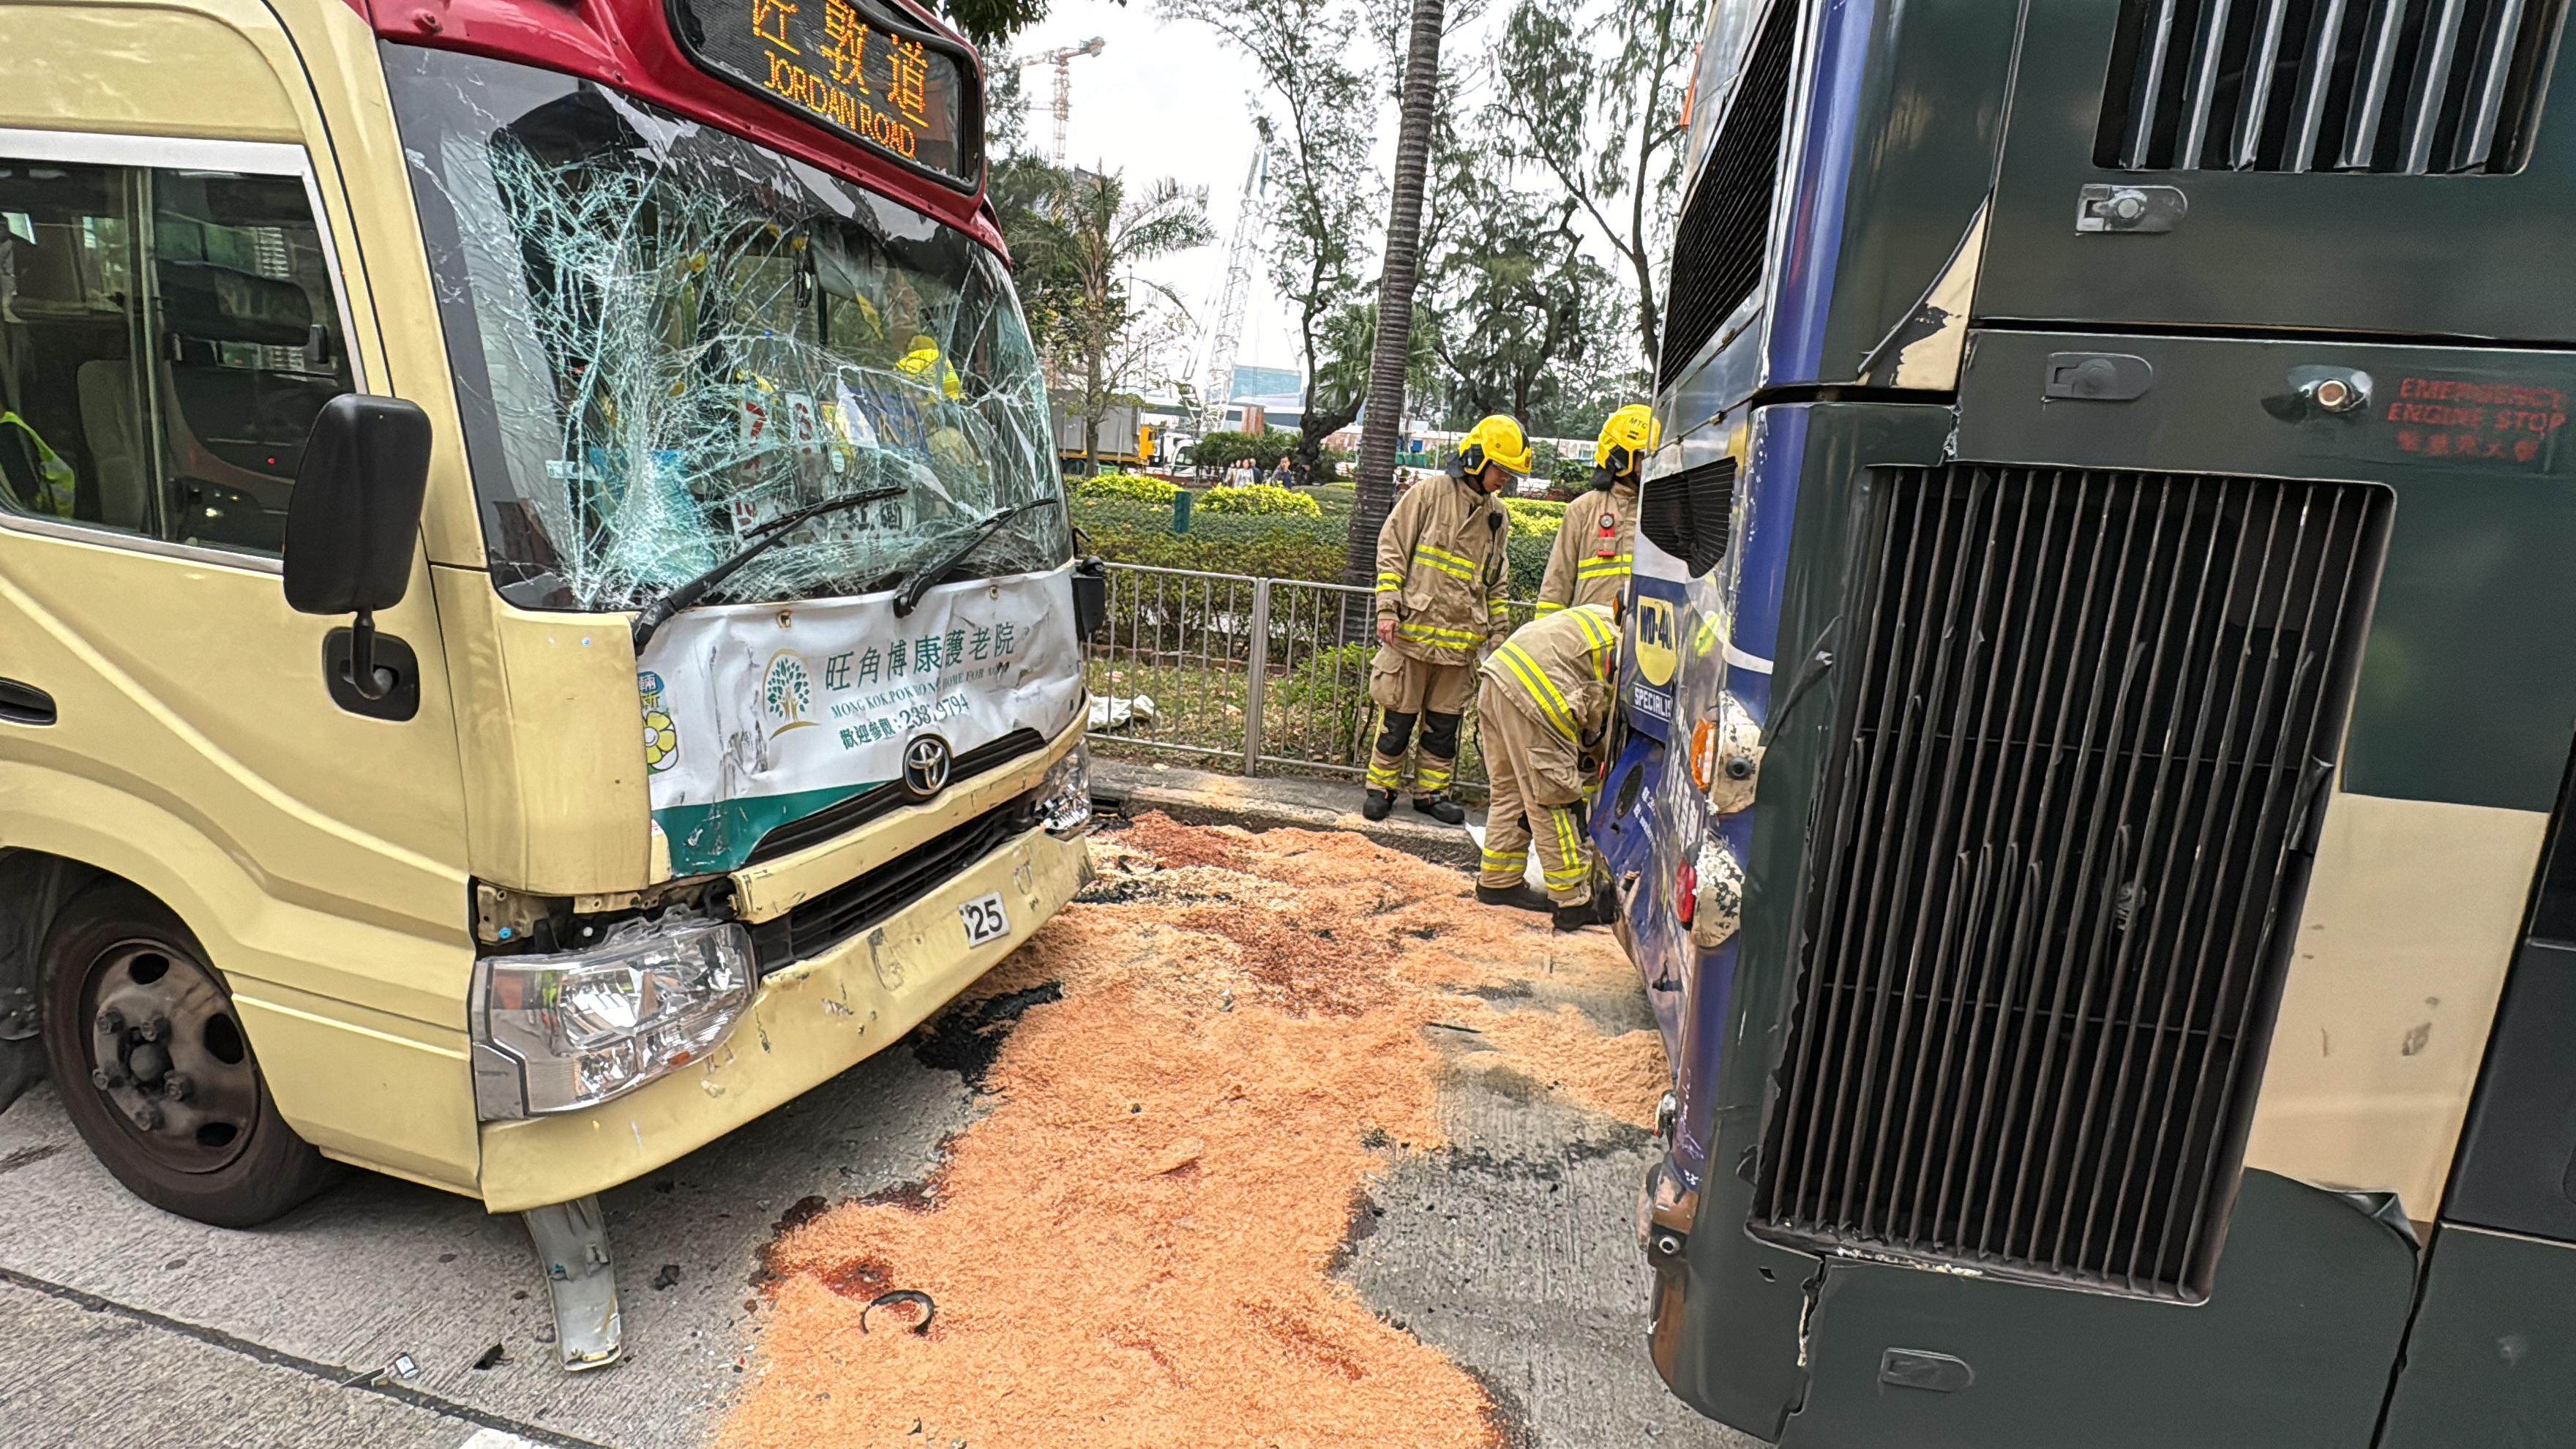 The front of the minibus was damaged in the crash. Photo: Handout